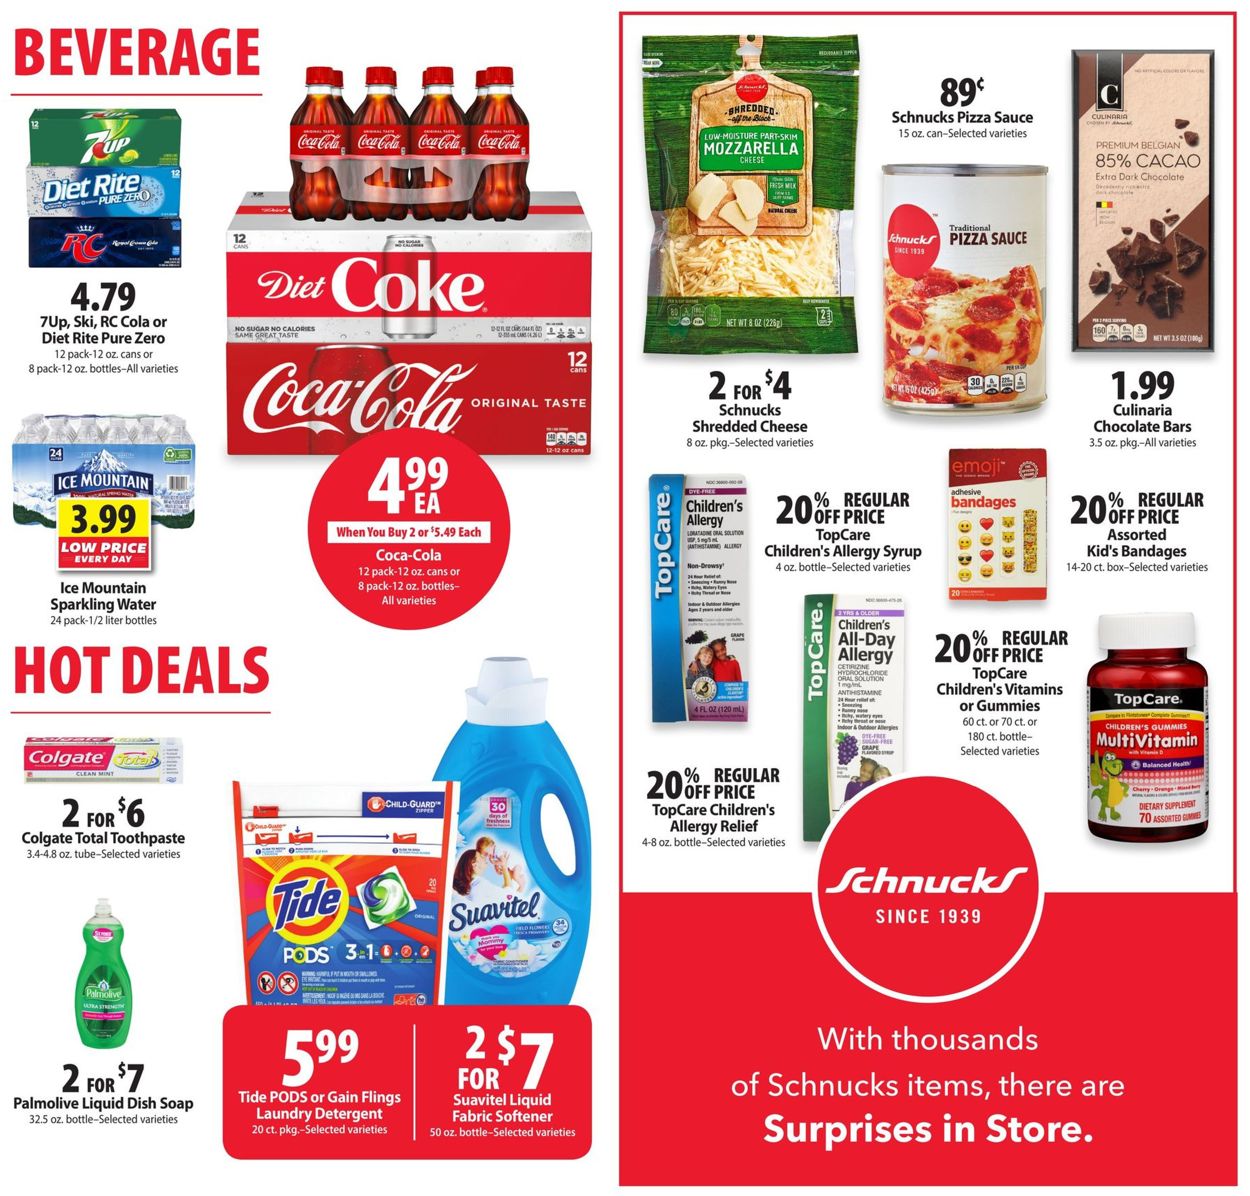 Schnucks Current weekly ad 07/24 - 07/30/2019 [5] - frequent-ads.com